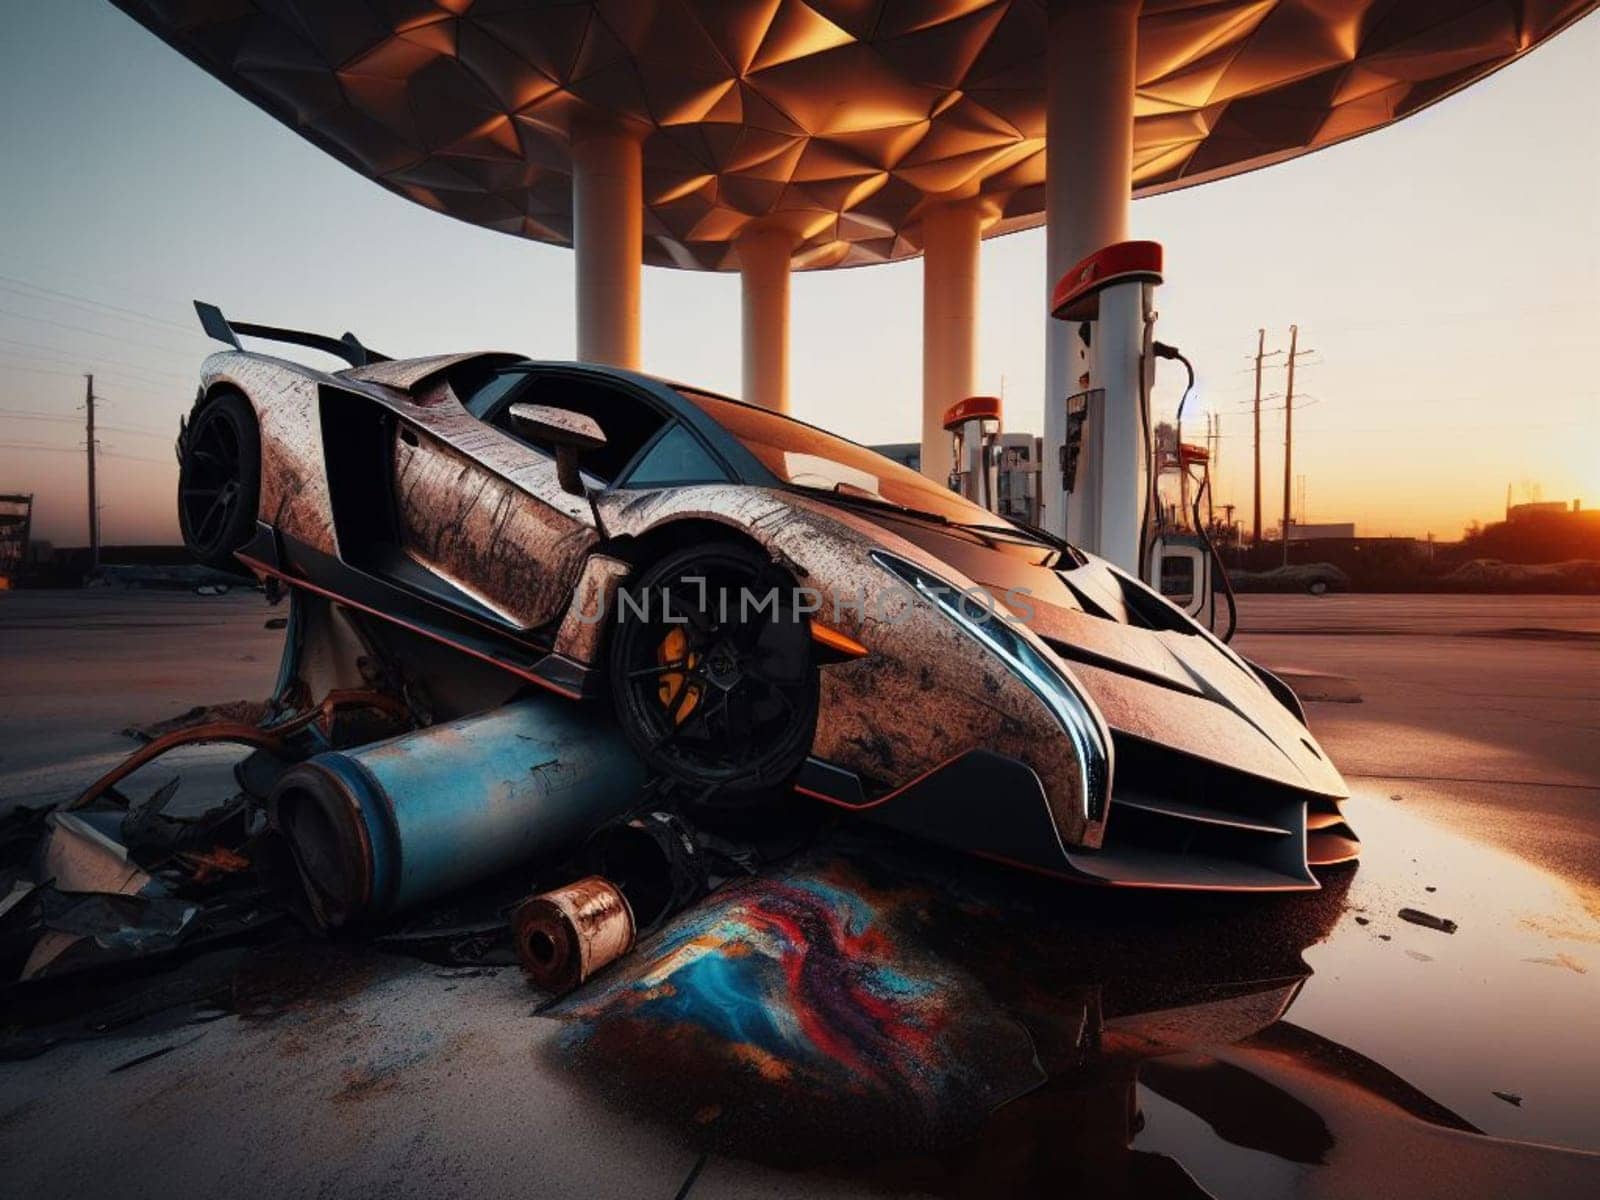 Crashed abandoned rusty expensive atmospheric supercar circulation banned for co2 emission dystopian by verbano